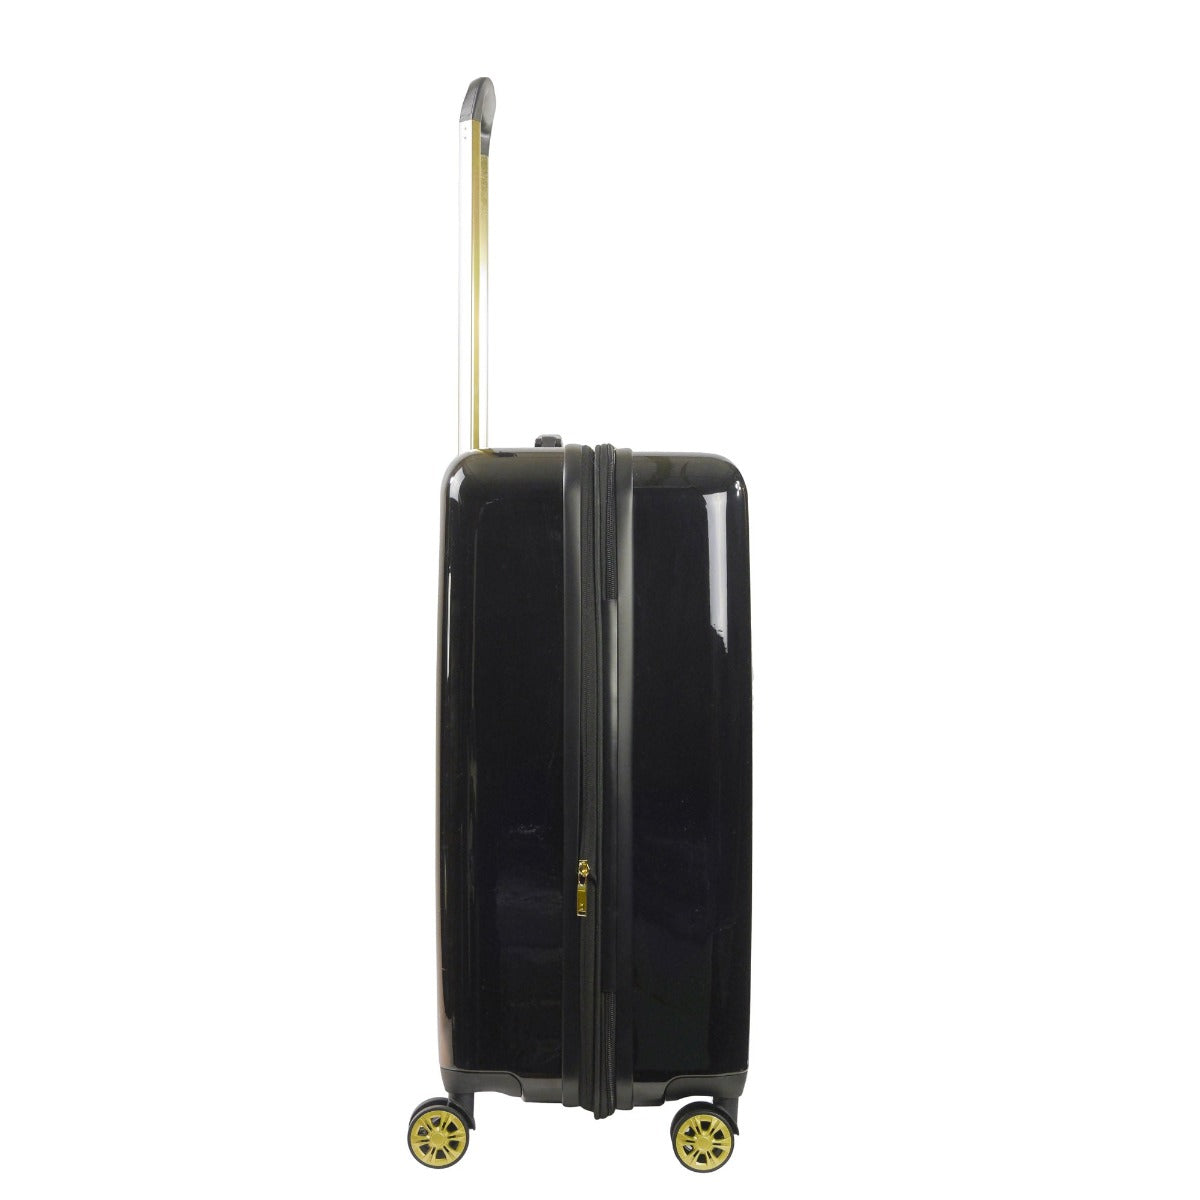 Ful Groove 27" hardside spinner suitcase check-in black luggage gold details